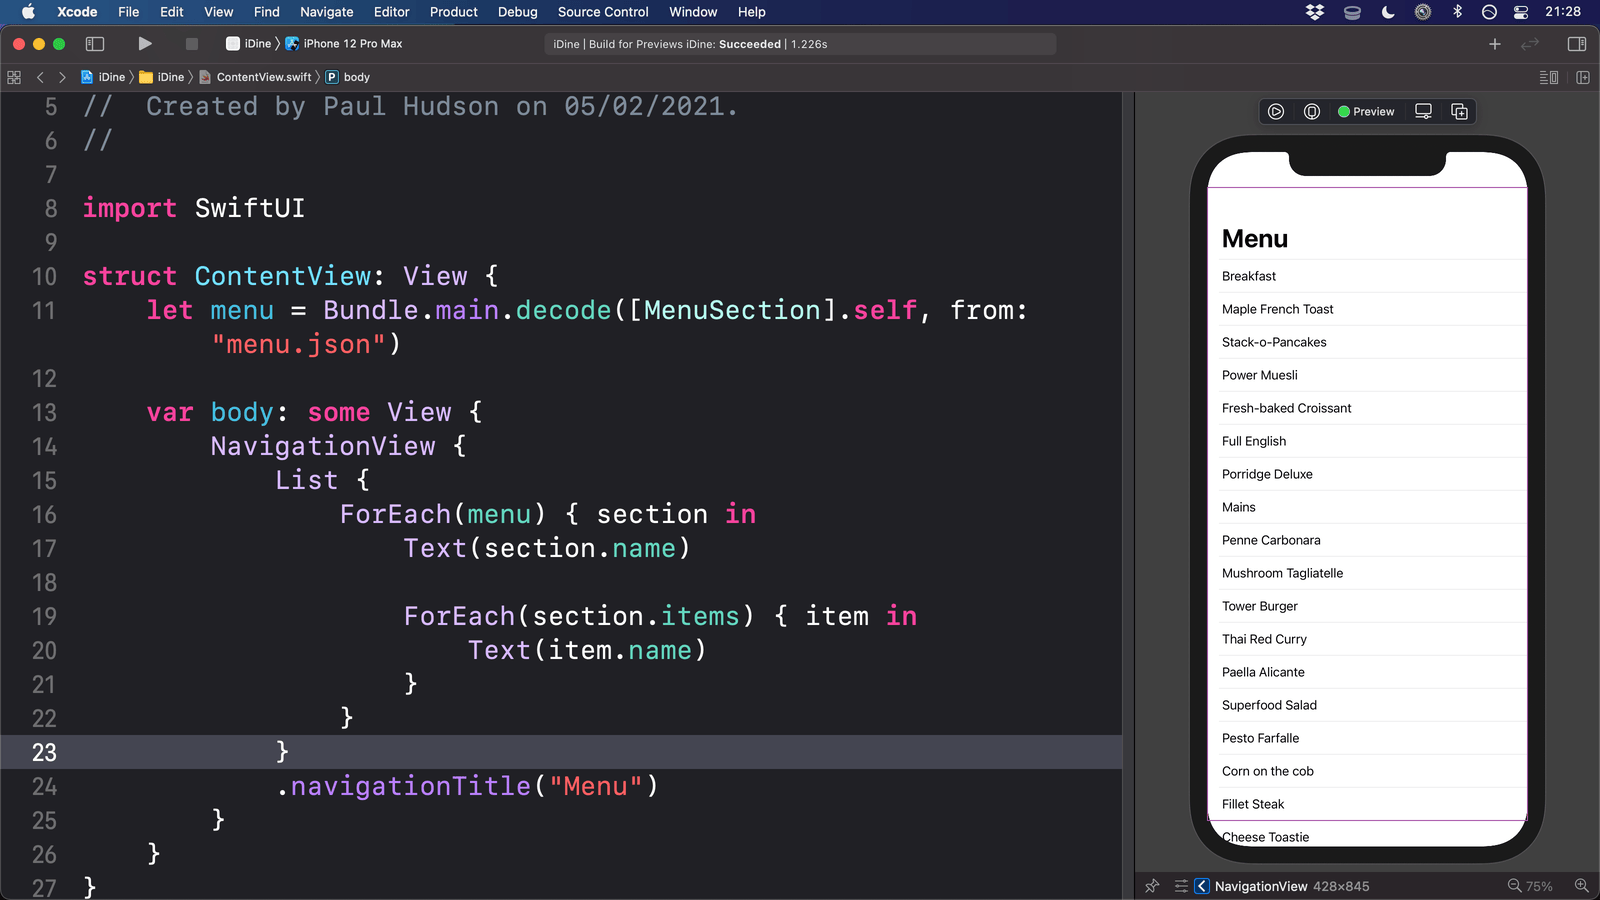 Xcode showing a SwiftUI list with many items, and a navigation bar at the top. Next to it is the code required to make the preview.